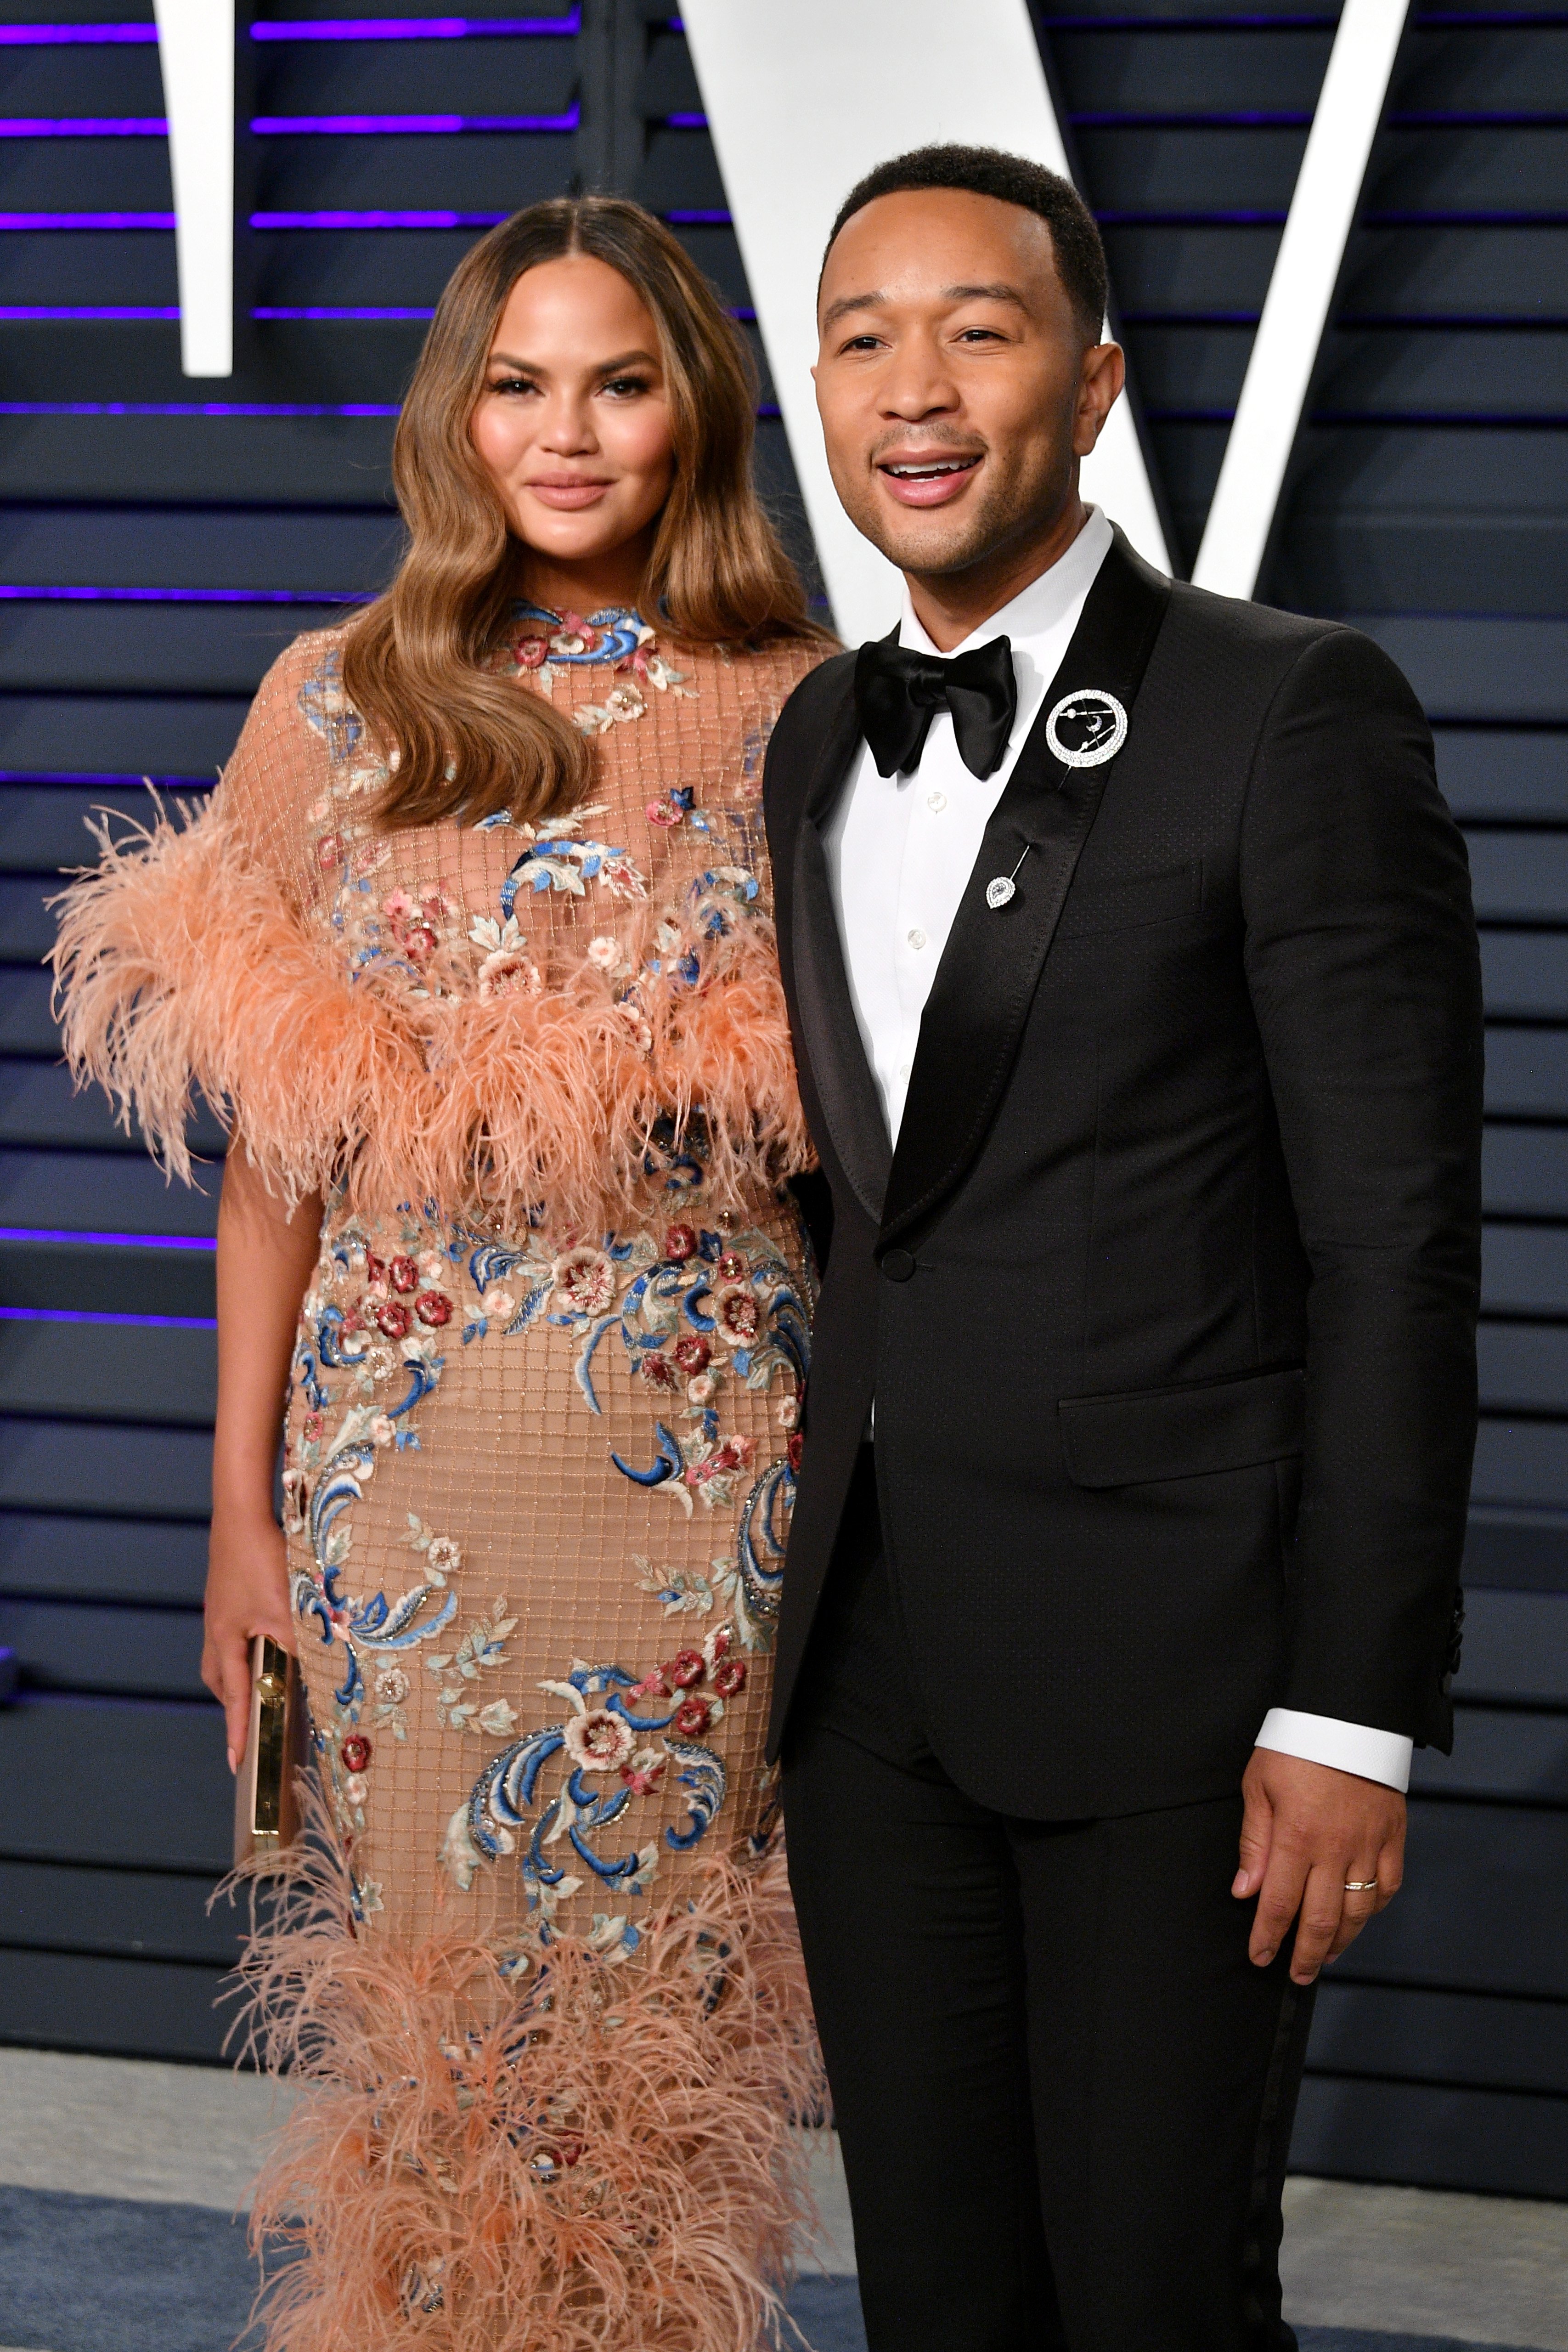 Chrissy Teigen and John Legend attend the 2019 Vanity Fair Oscar Party on February 24, 2019, in Beverly Hills, California. | Source: Getty Images.